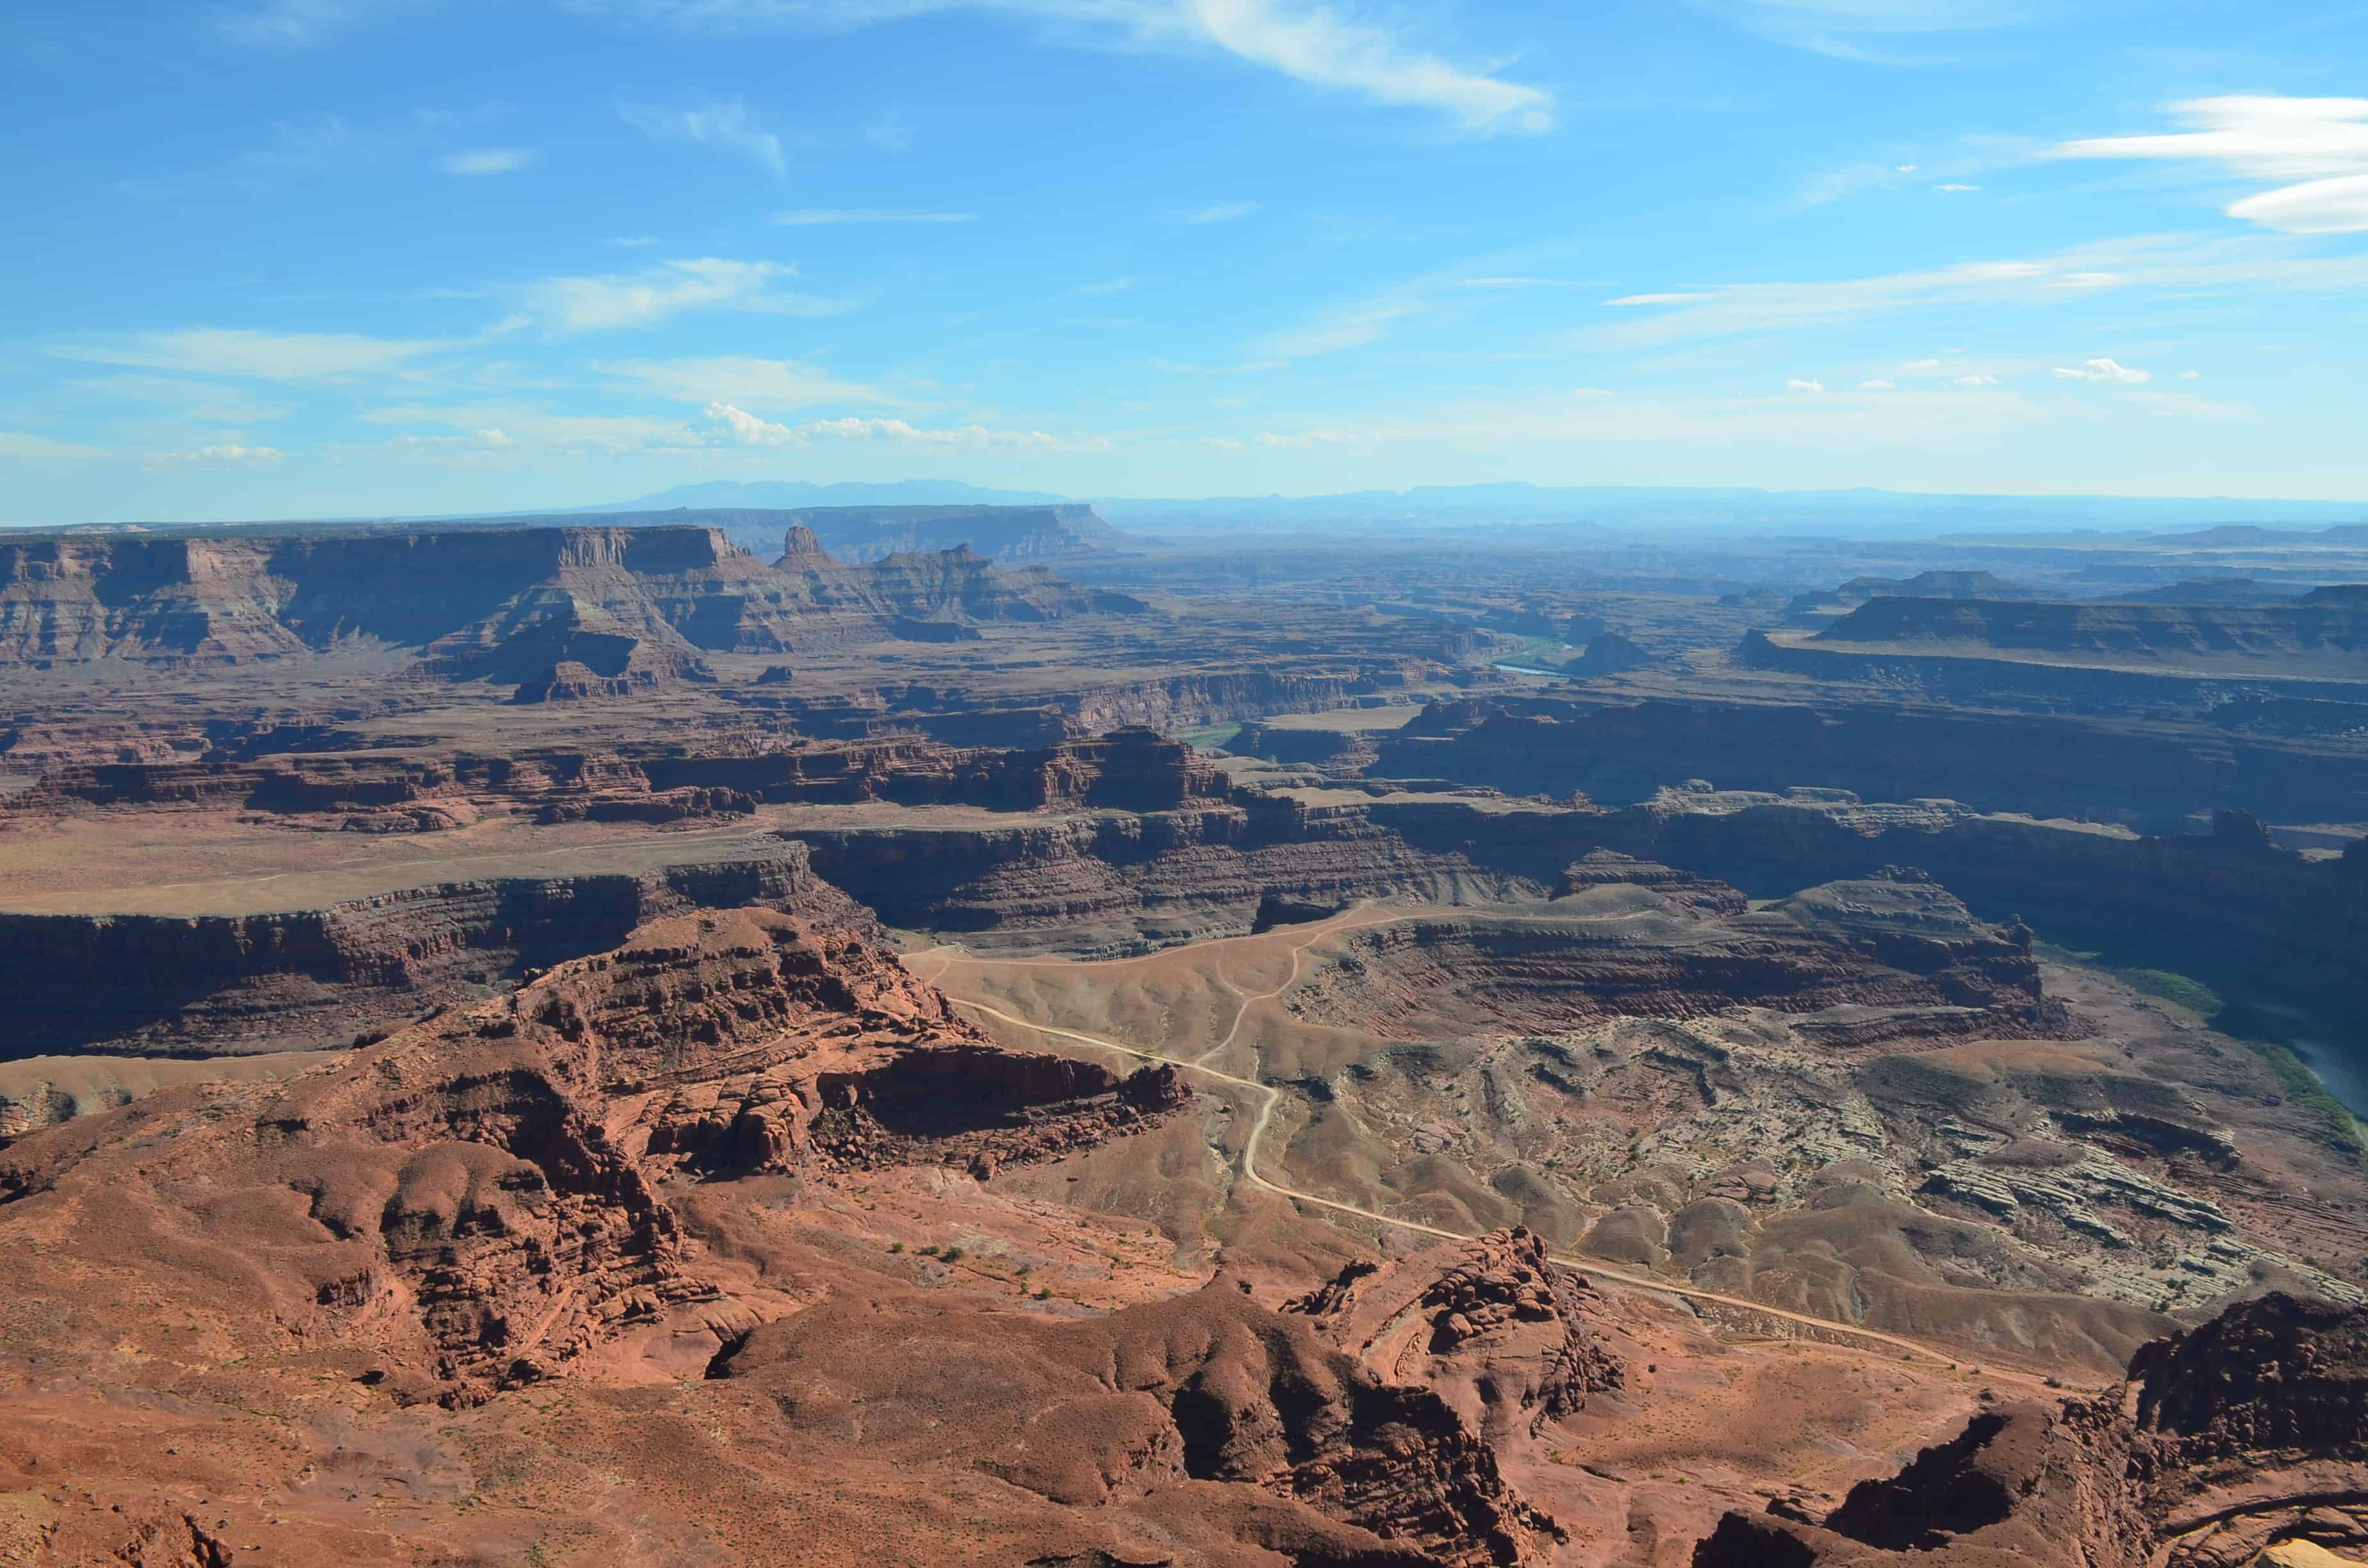 Looking south from Dead Horse Point at Dead Horse Point State Park in Utah